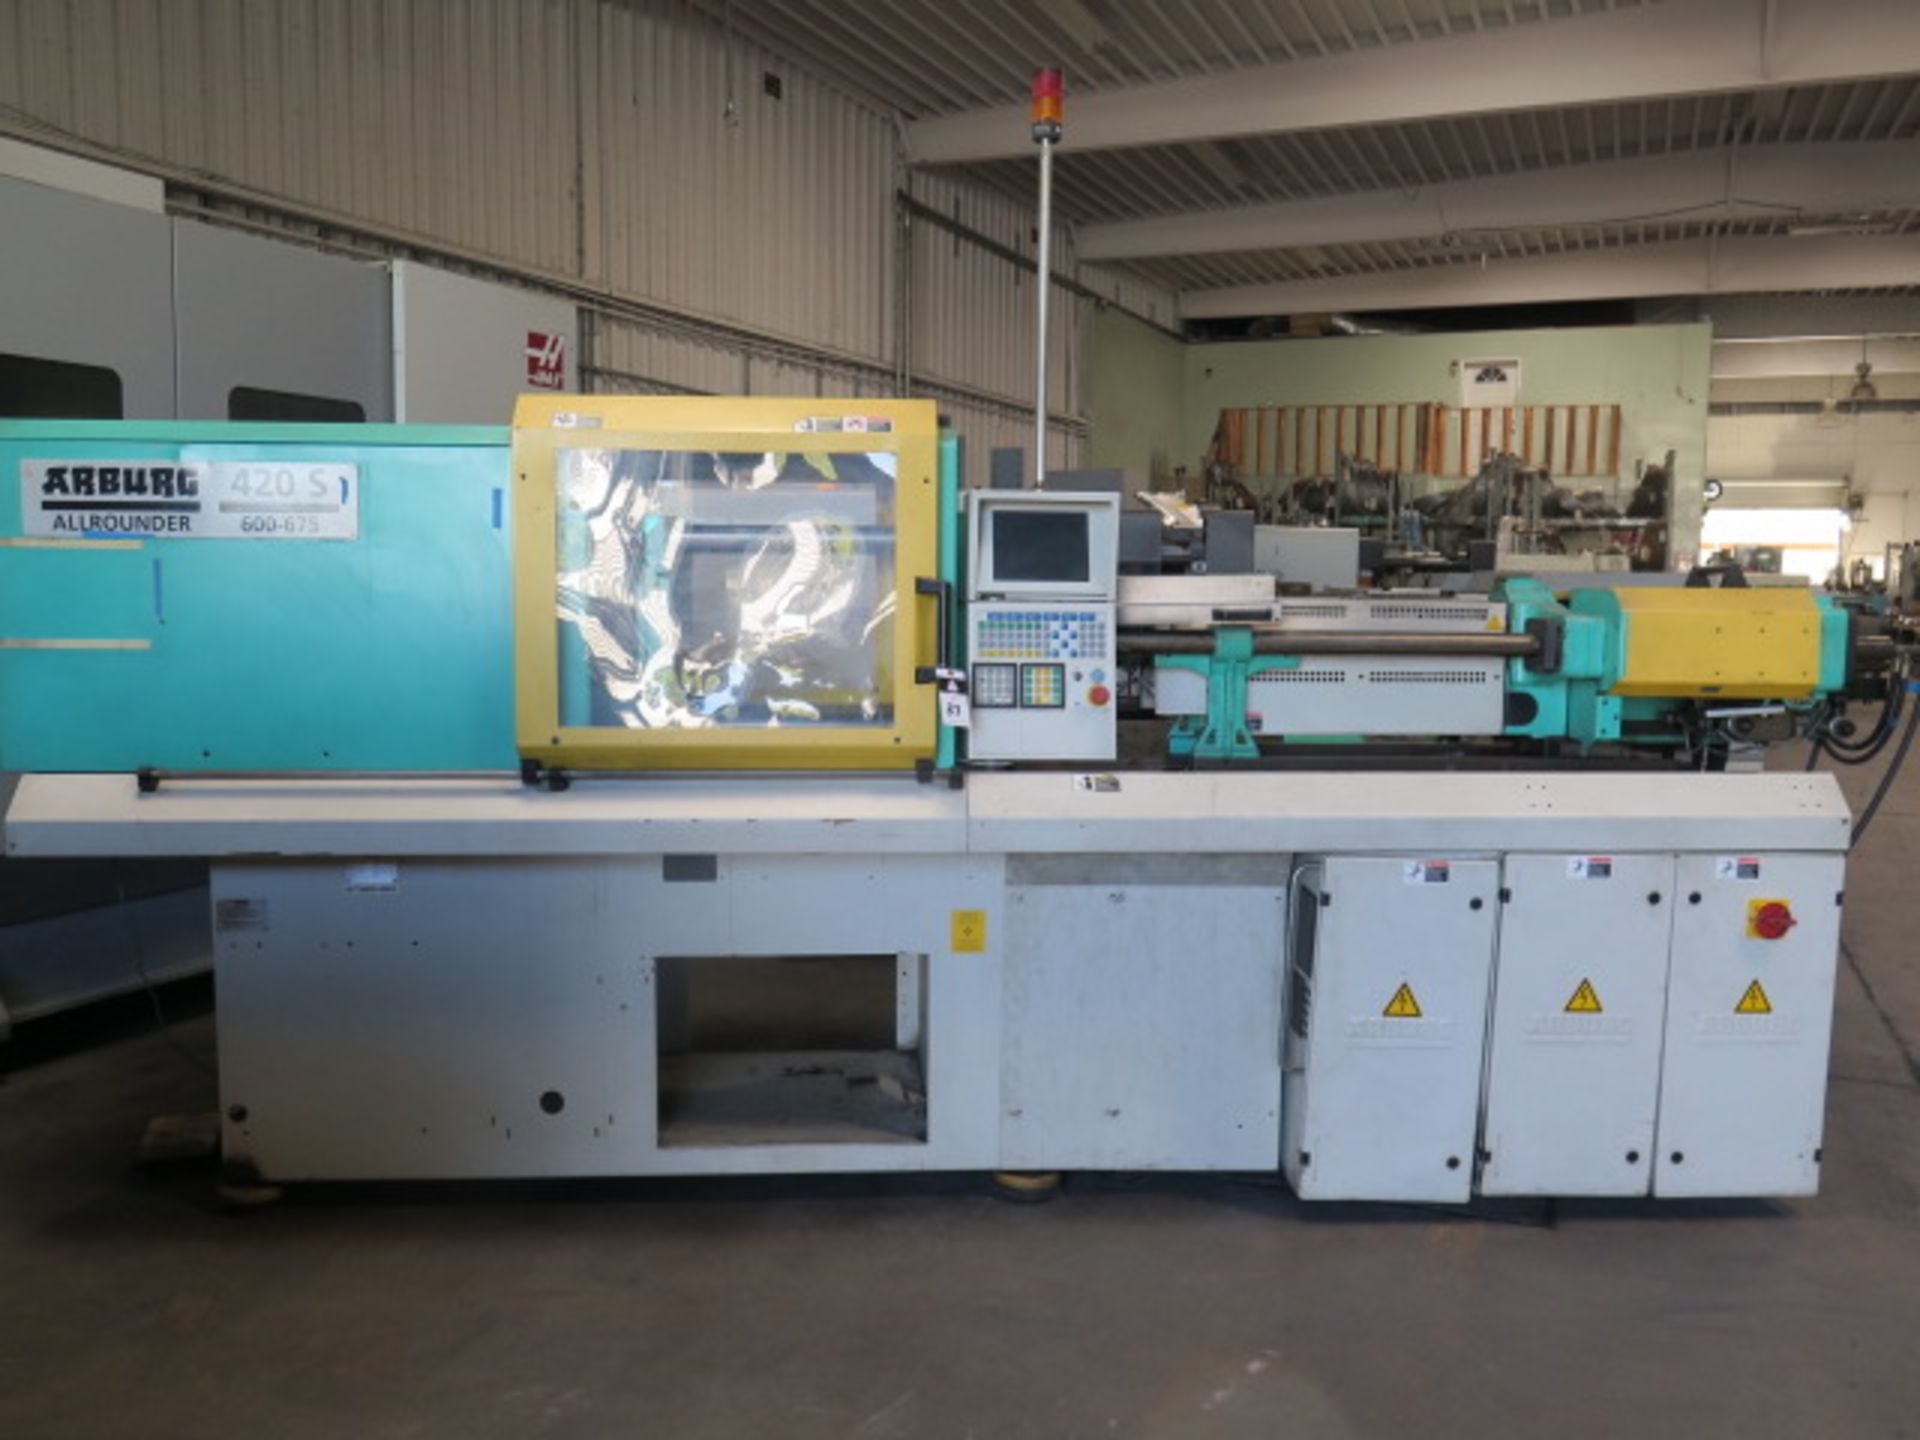 Arburg 420S Allrounder 600-675 67 CNC Ton Plastic Injection Molding Machine s/n 176654, SOLD AS IS - Image 3 of 16